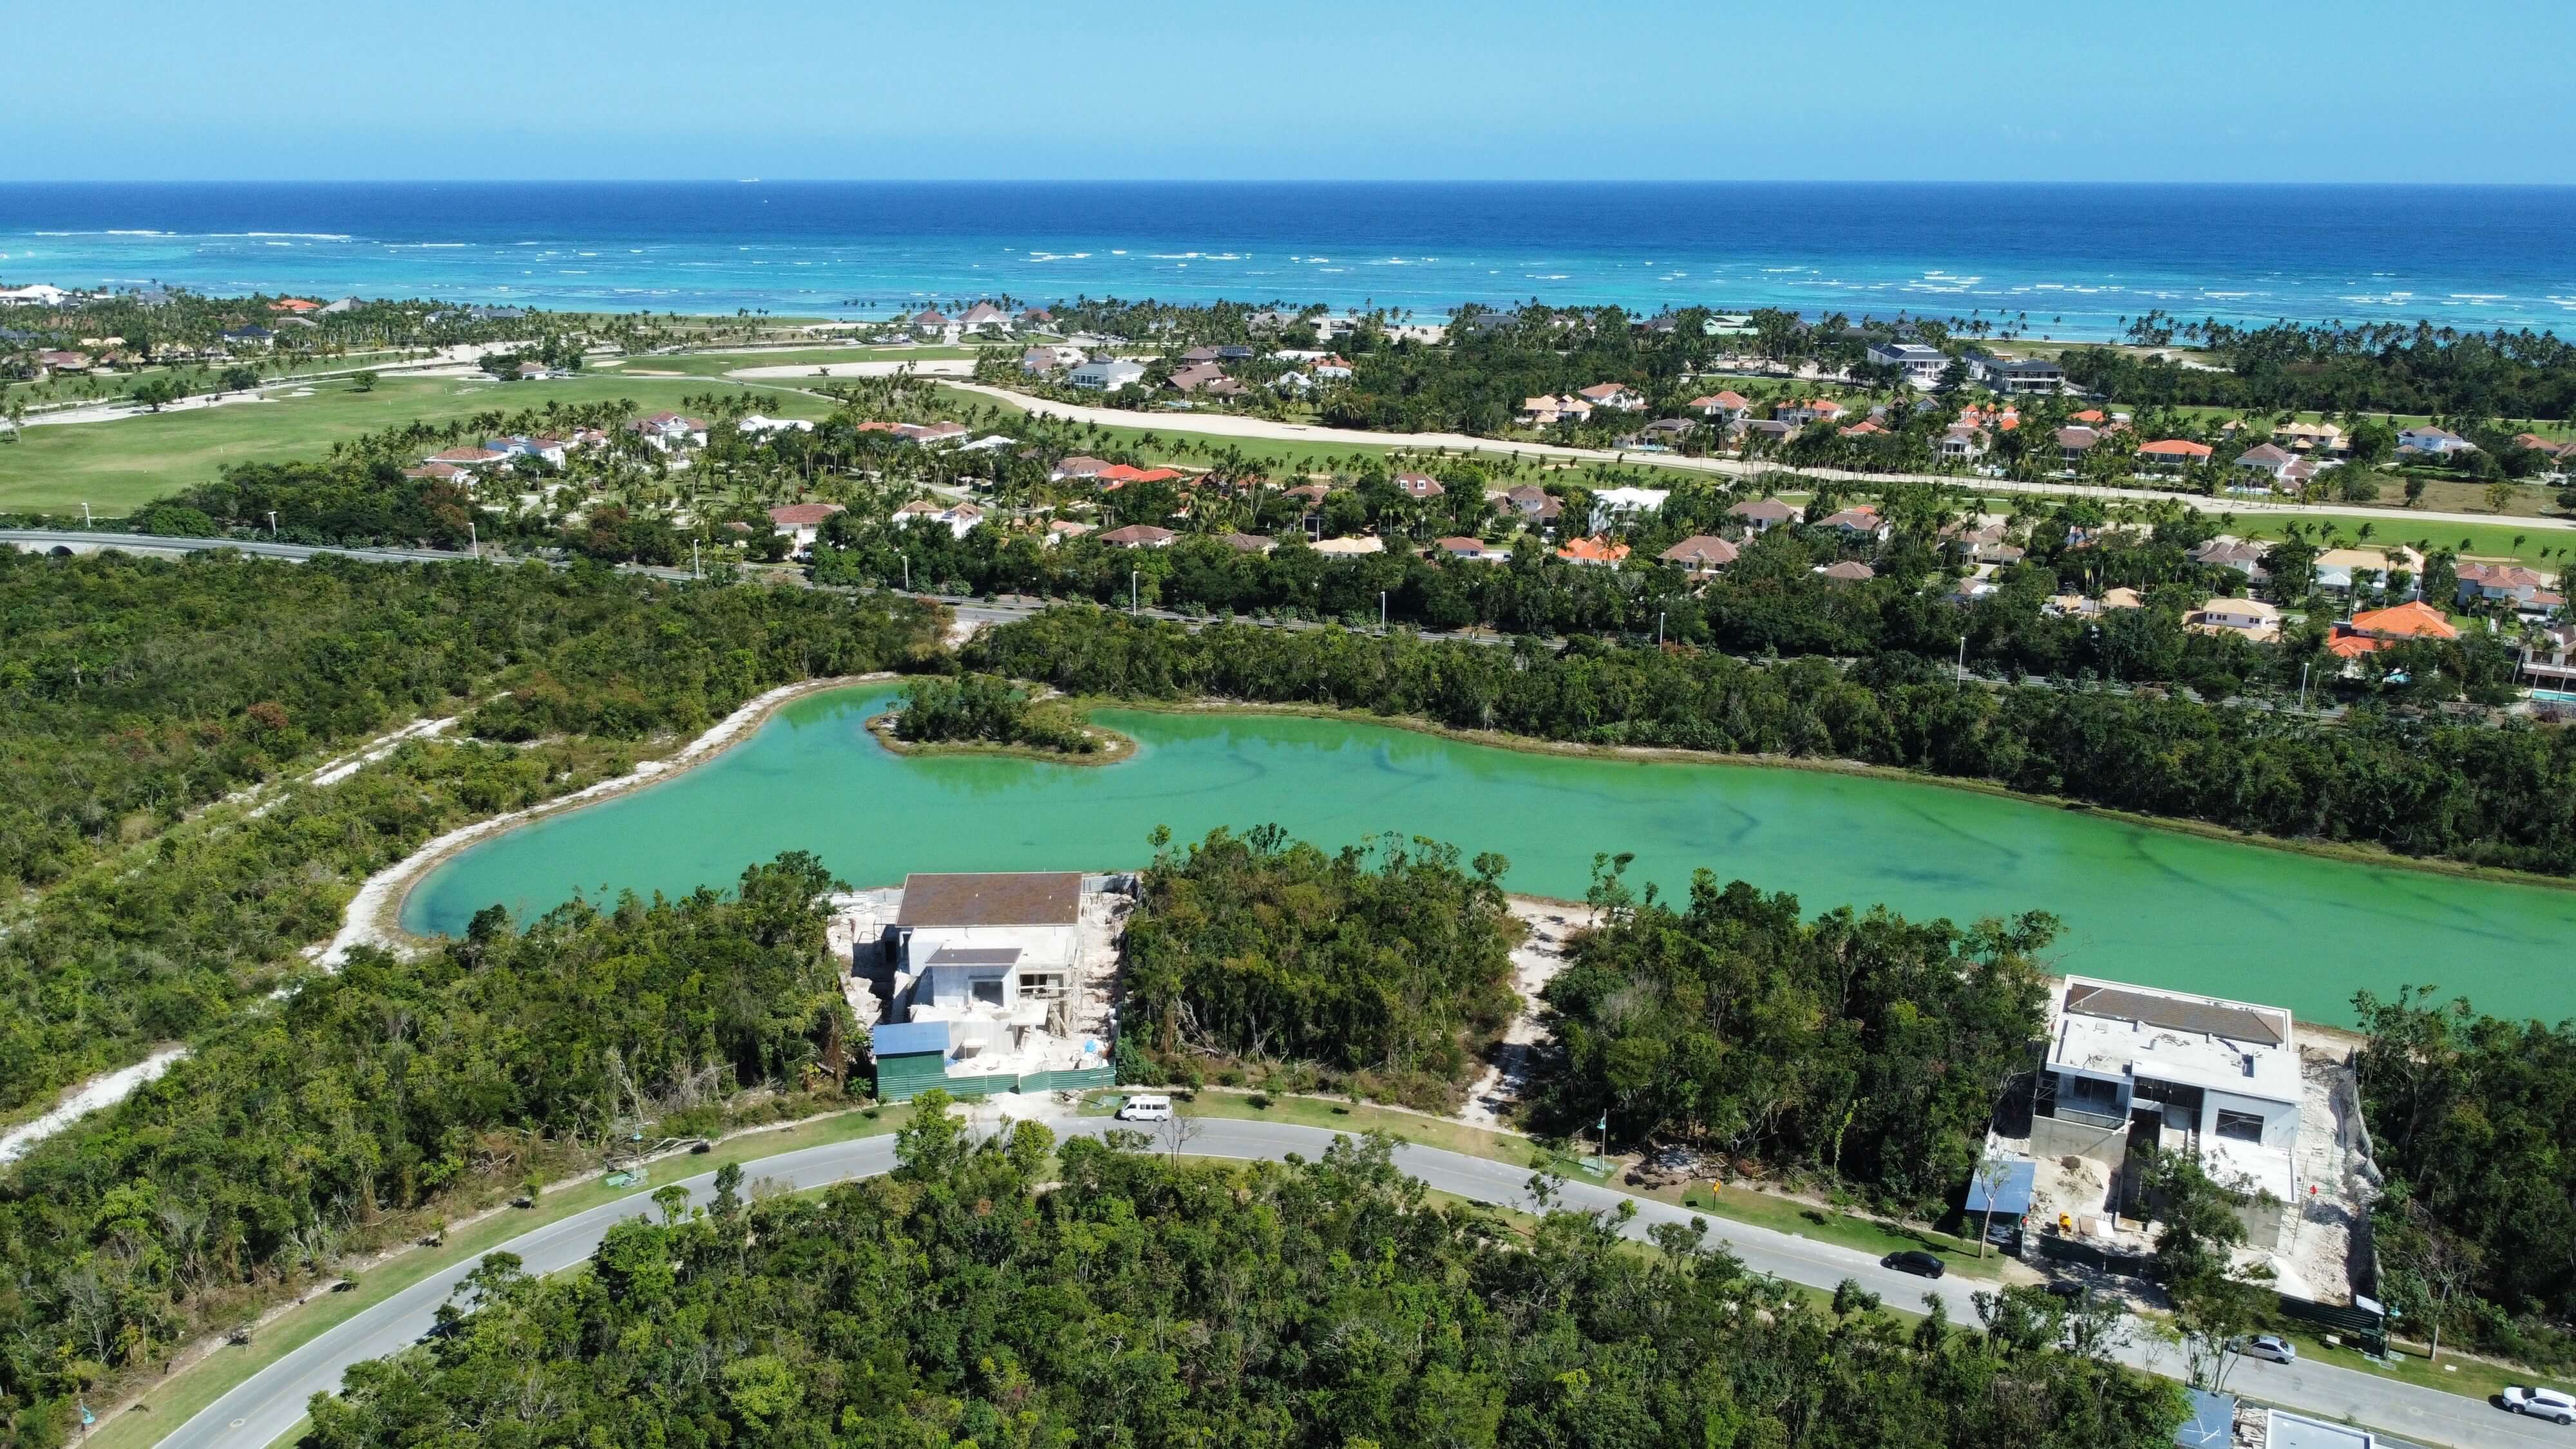 Lake View Land Lot For Sale In Punta Cana Resort. Dominican Republic